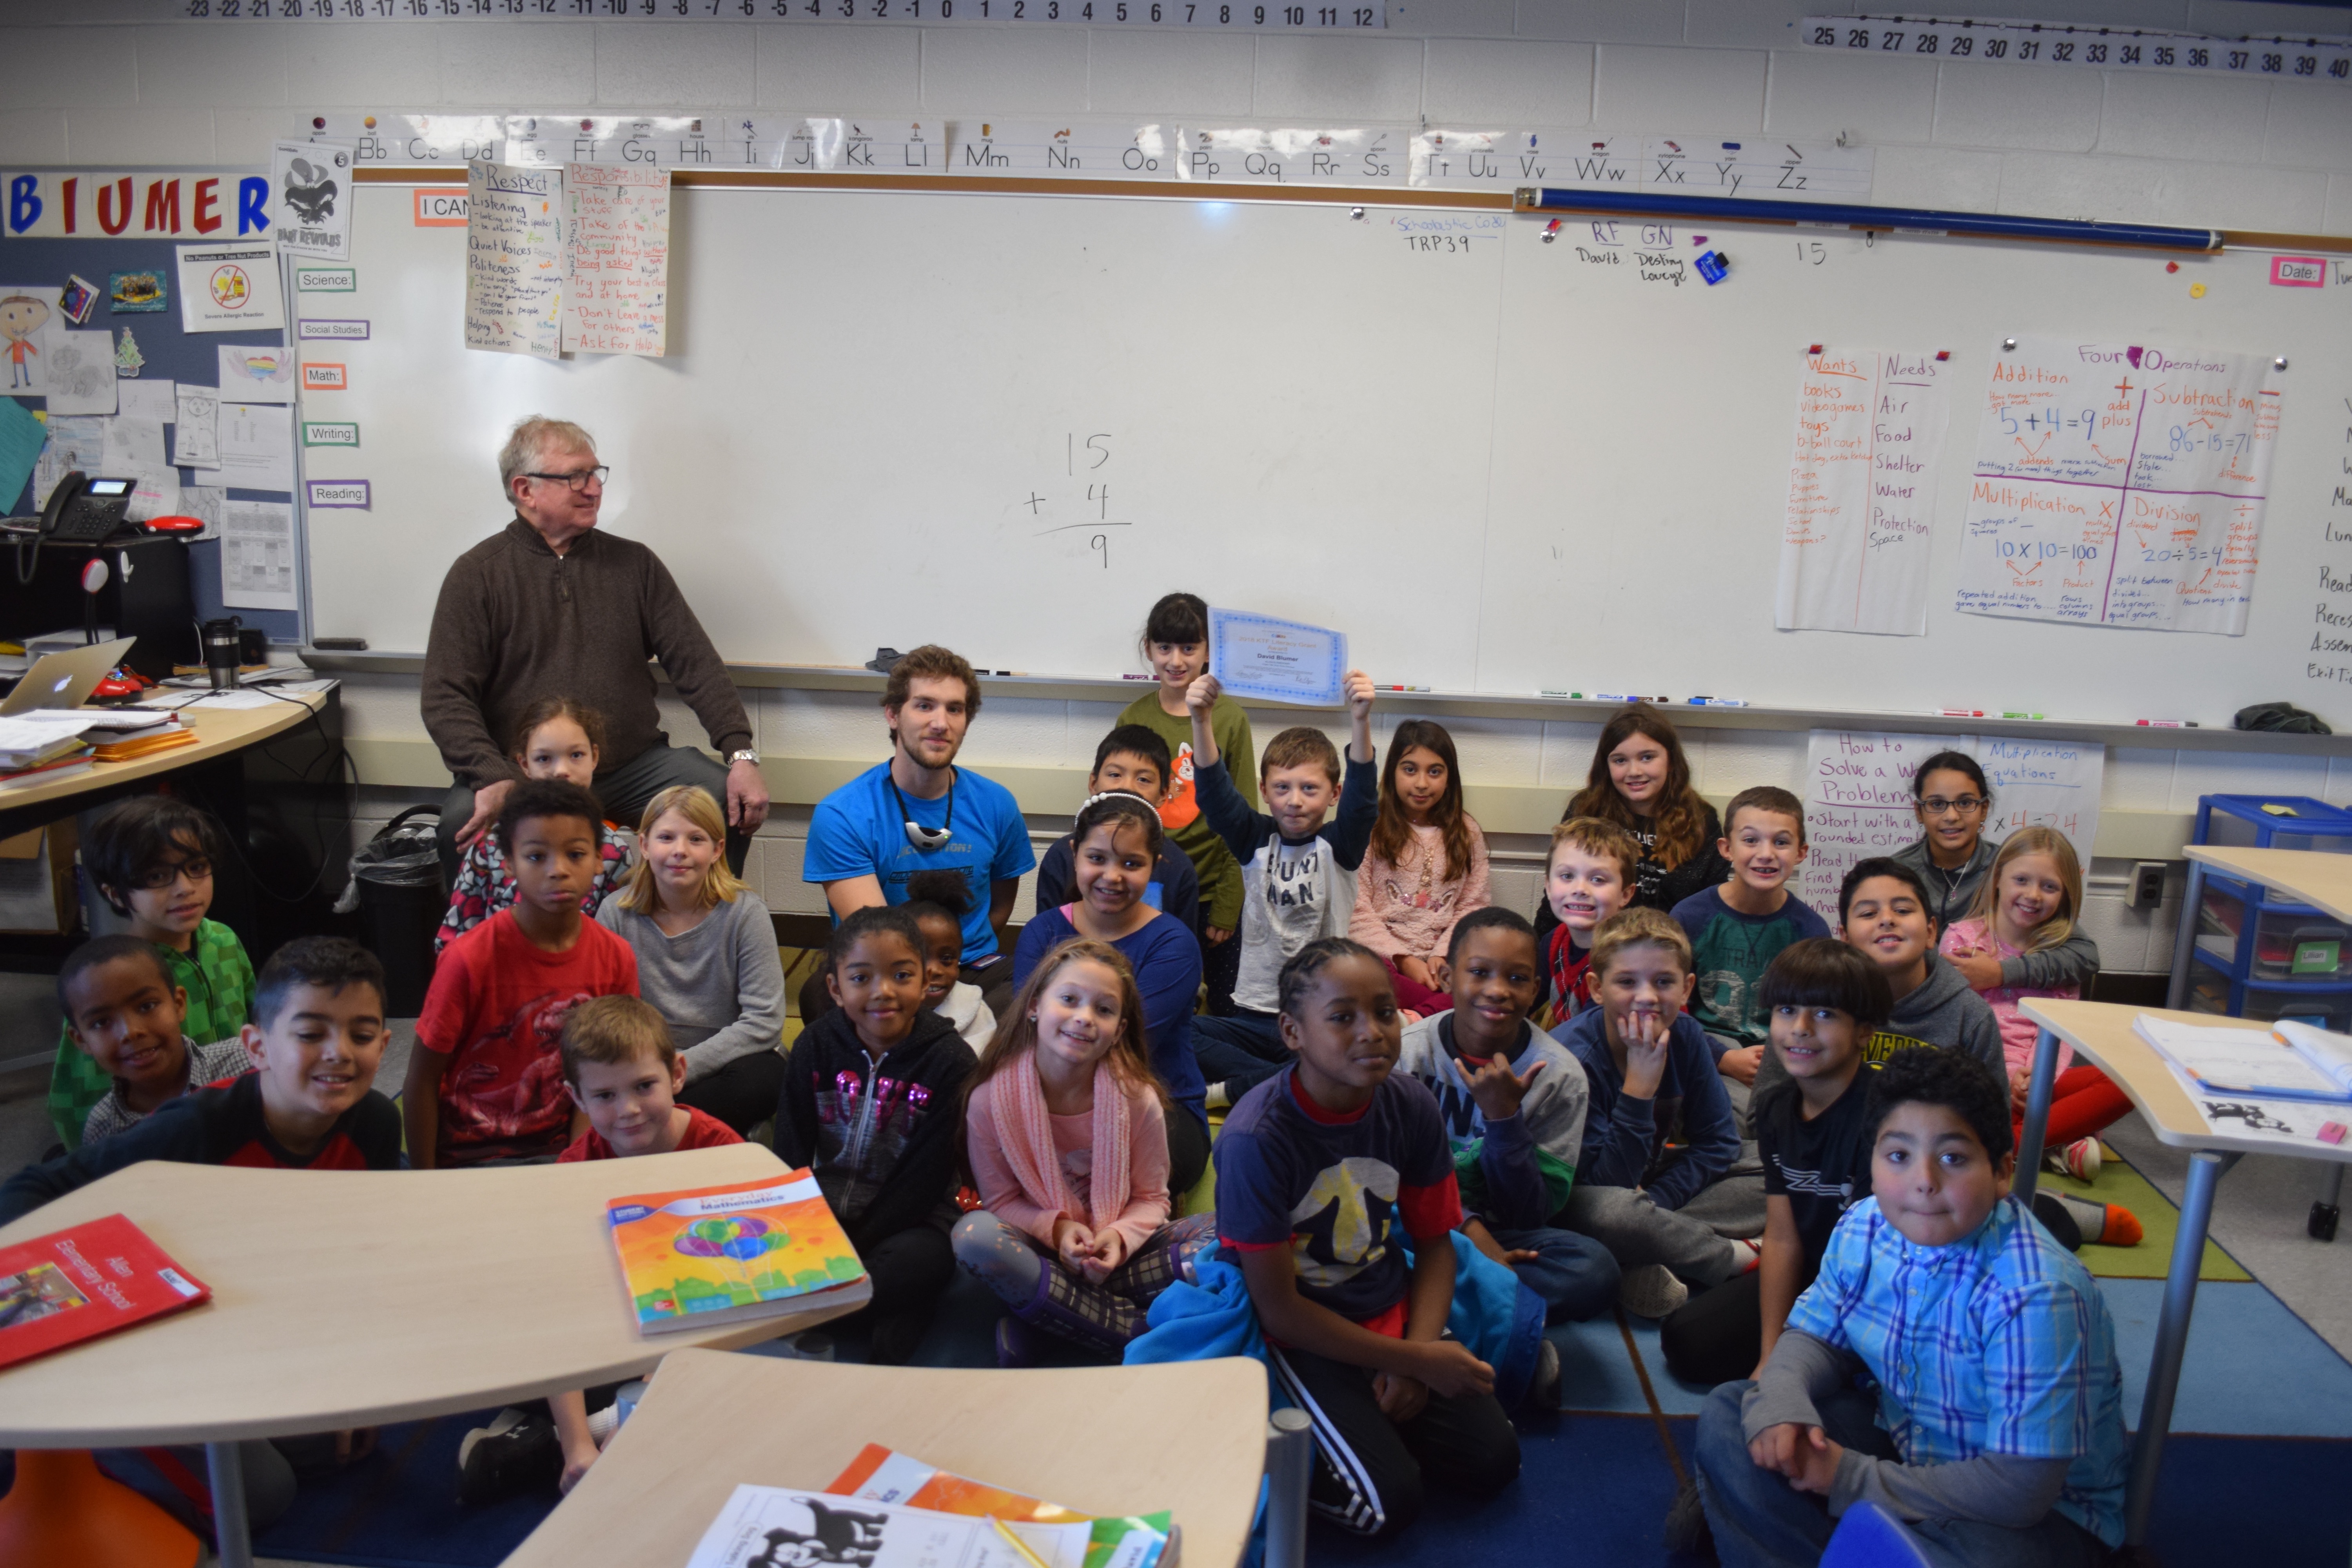 David Blumer's 3rd grade class at Allen Elementary with former Trustee Andy Thomas.